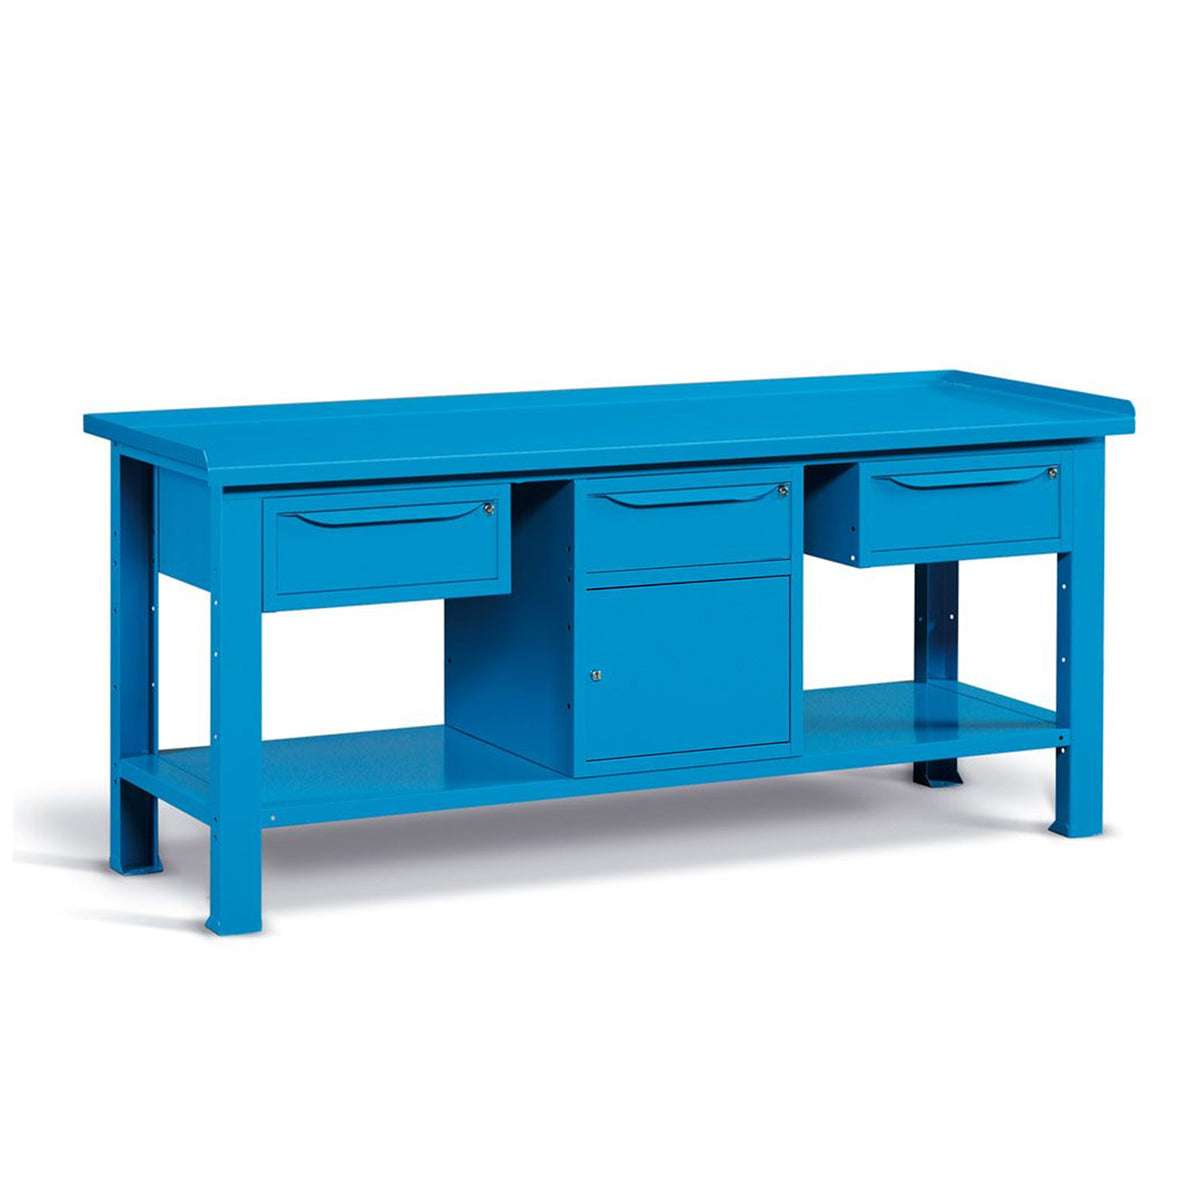 WORKSHOP WORKBENCH STEEL TOP 2007 x 705 x 855 H - 2 CABINETS 1 DRAWER + 1 CABINET 1 DRAWER AND 1 DOOR - FAMI - BLUE